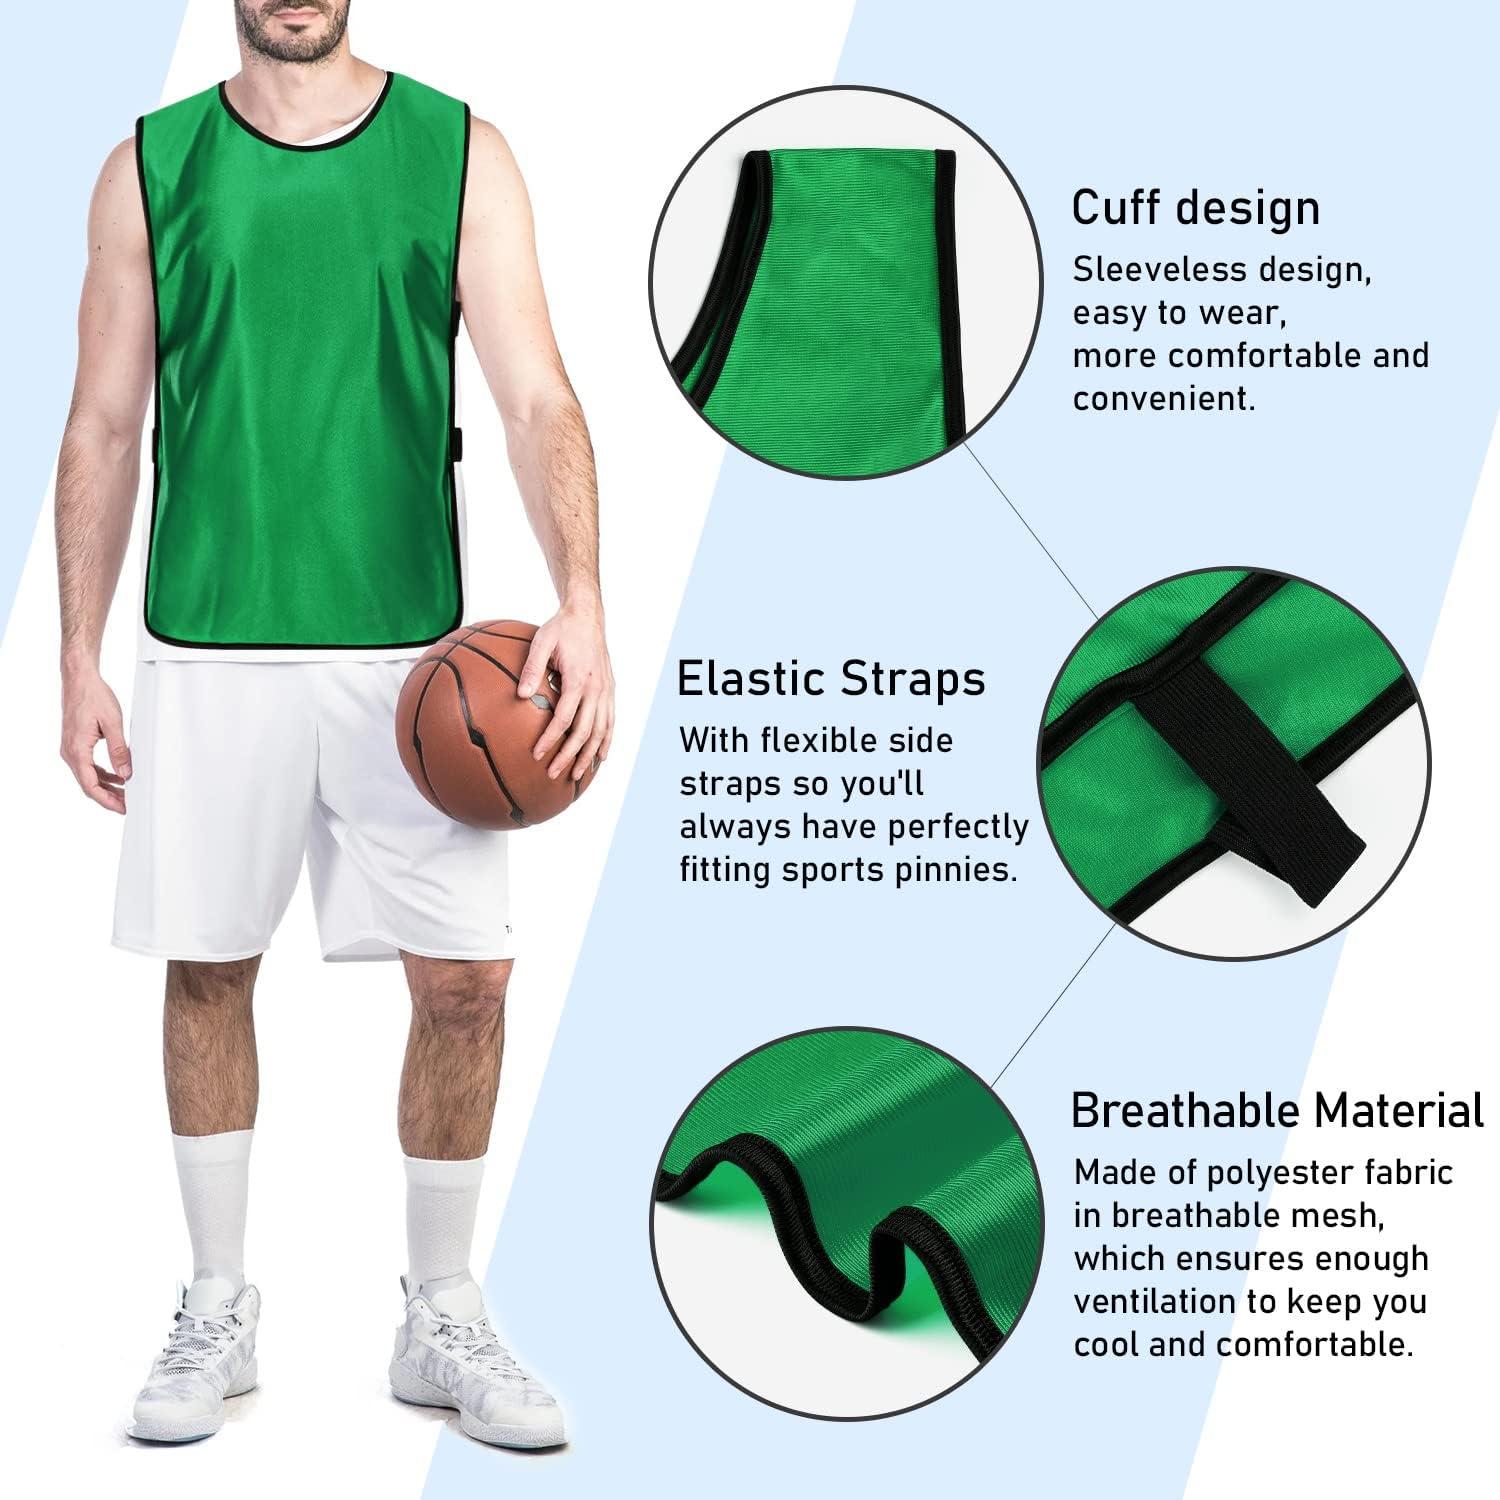 Football Training Vest Quickly-dry Game Waistcoat Adult's Sports Team  Uniform Large Mesh No Strap